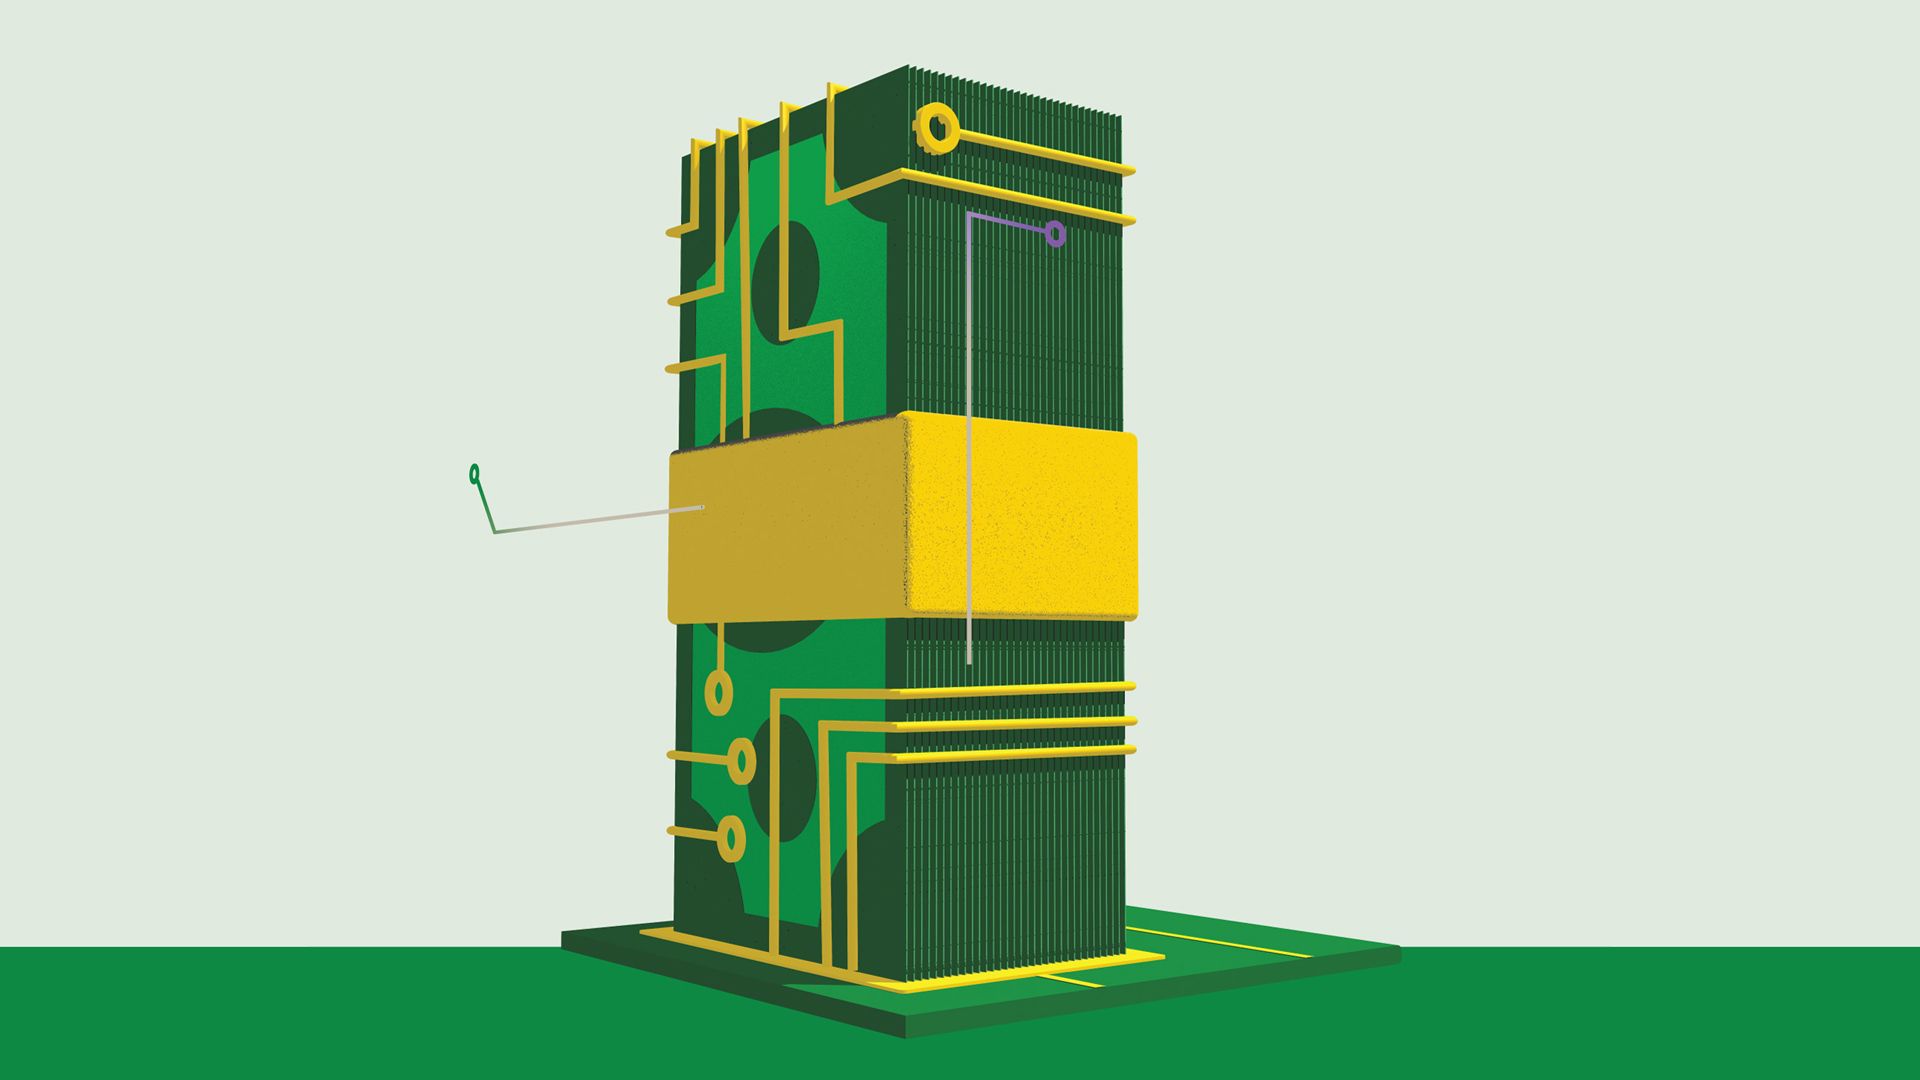 Illustration of a sheaf of dollar bills forming a vertical tower of circuits